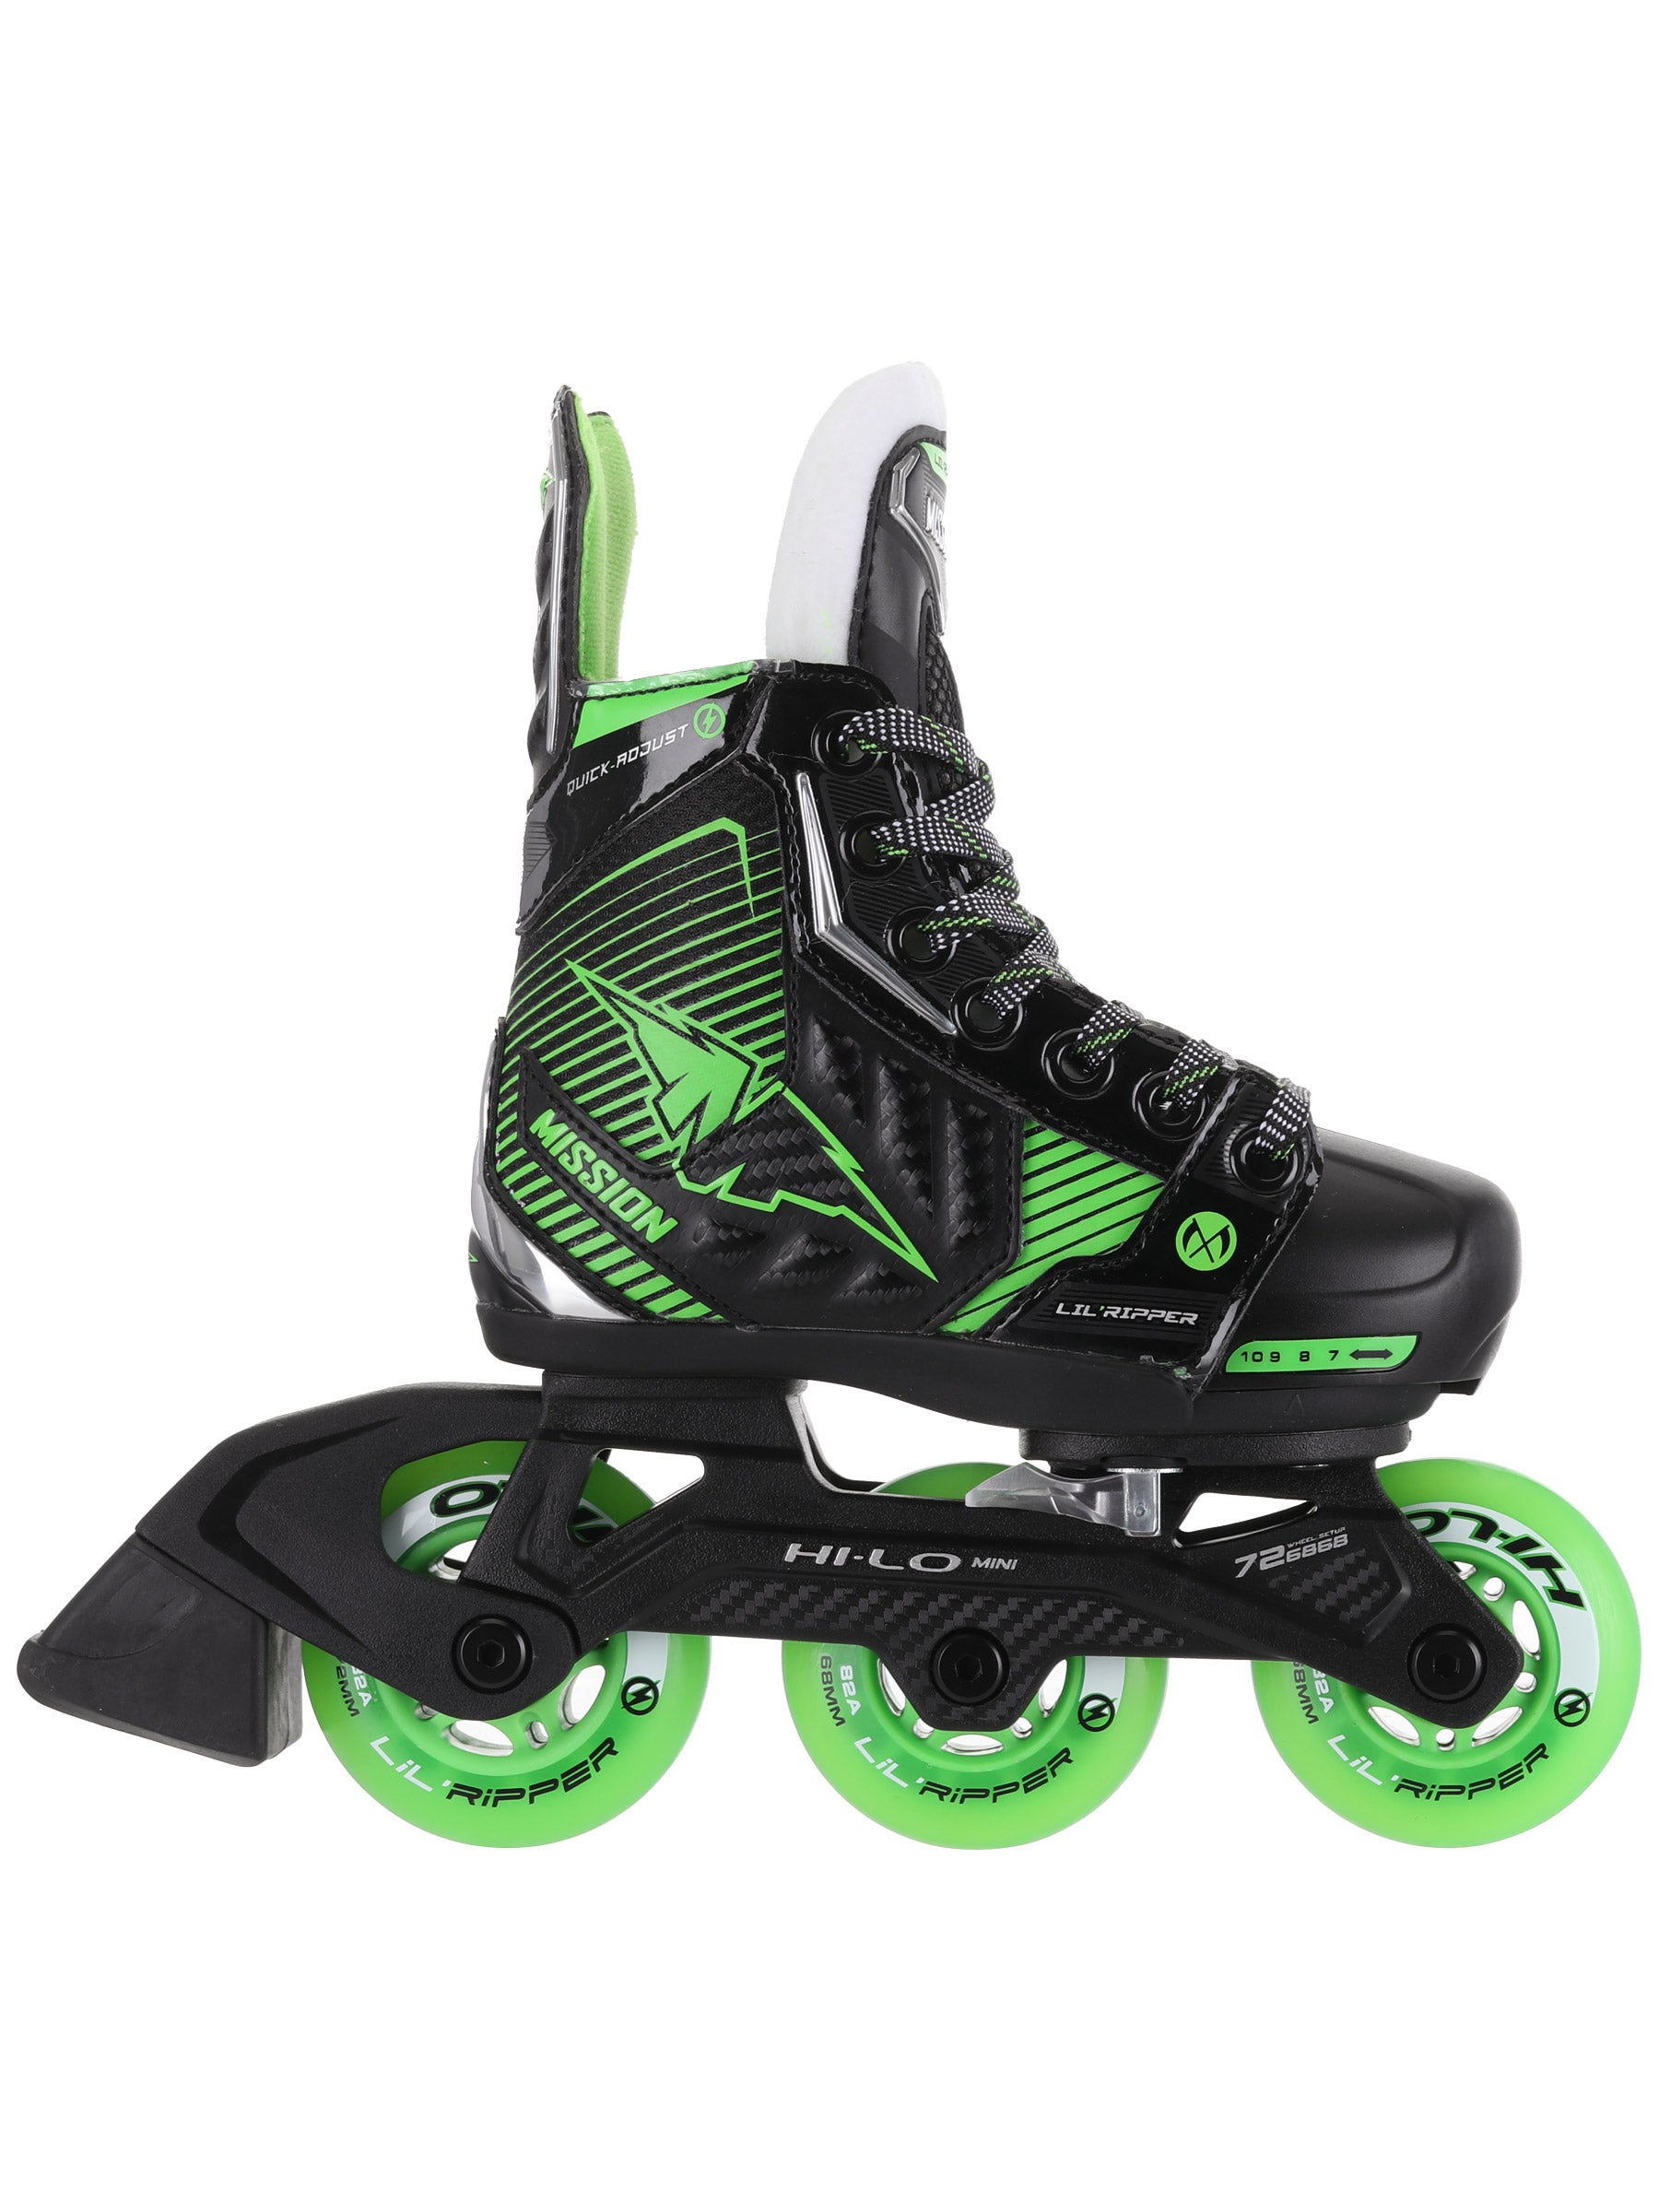 Mission Skates Unworn in box Multiple styles and sizes 